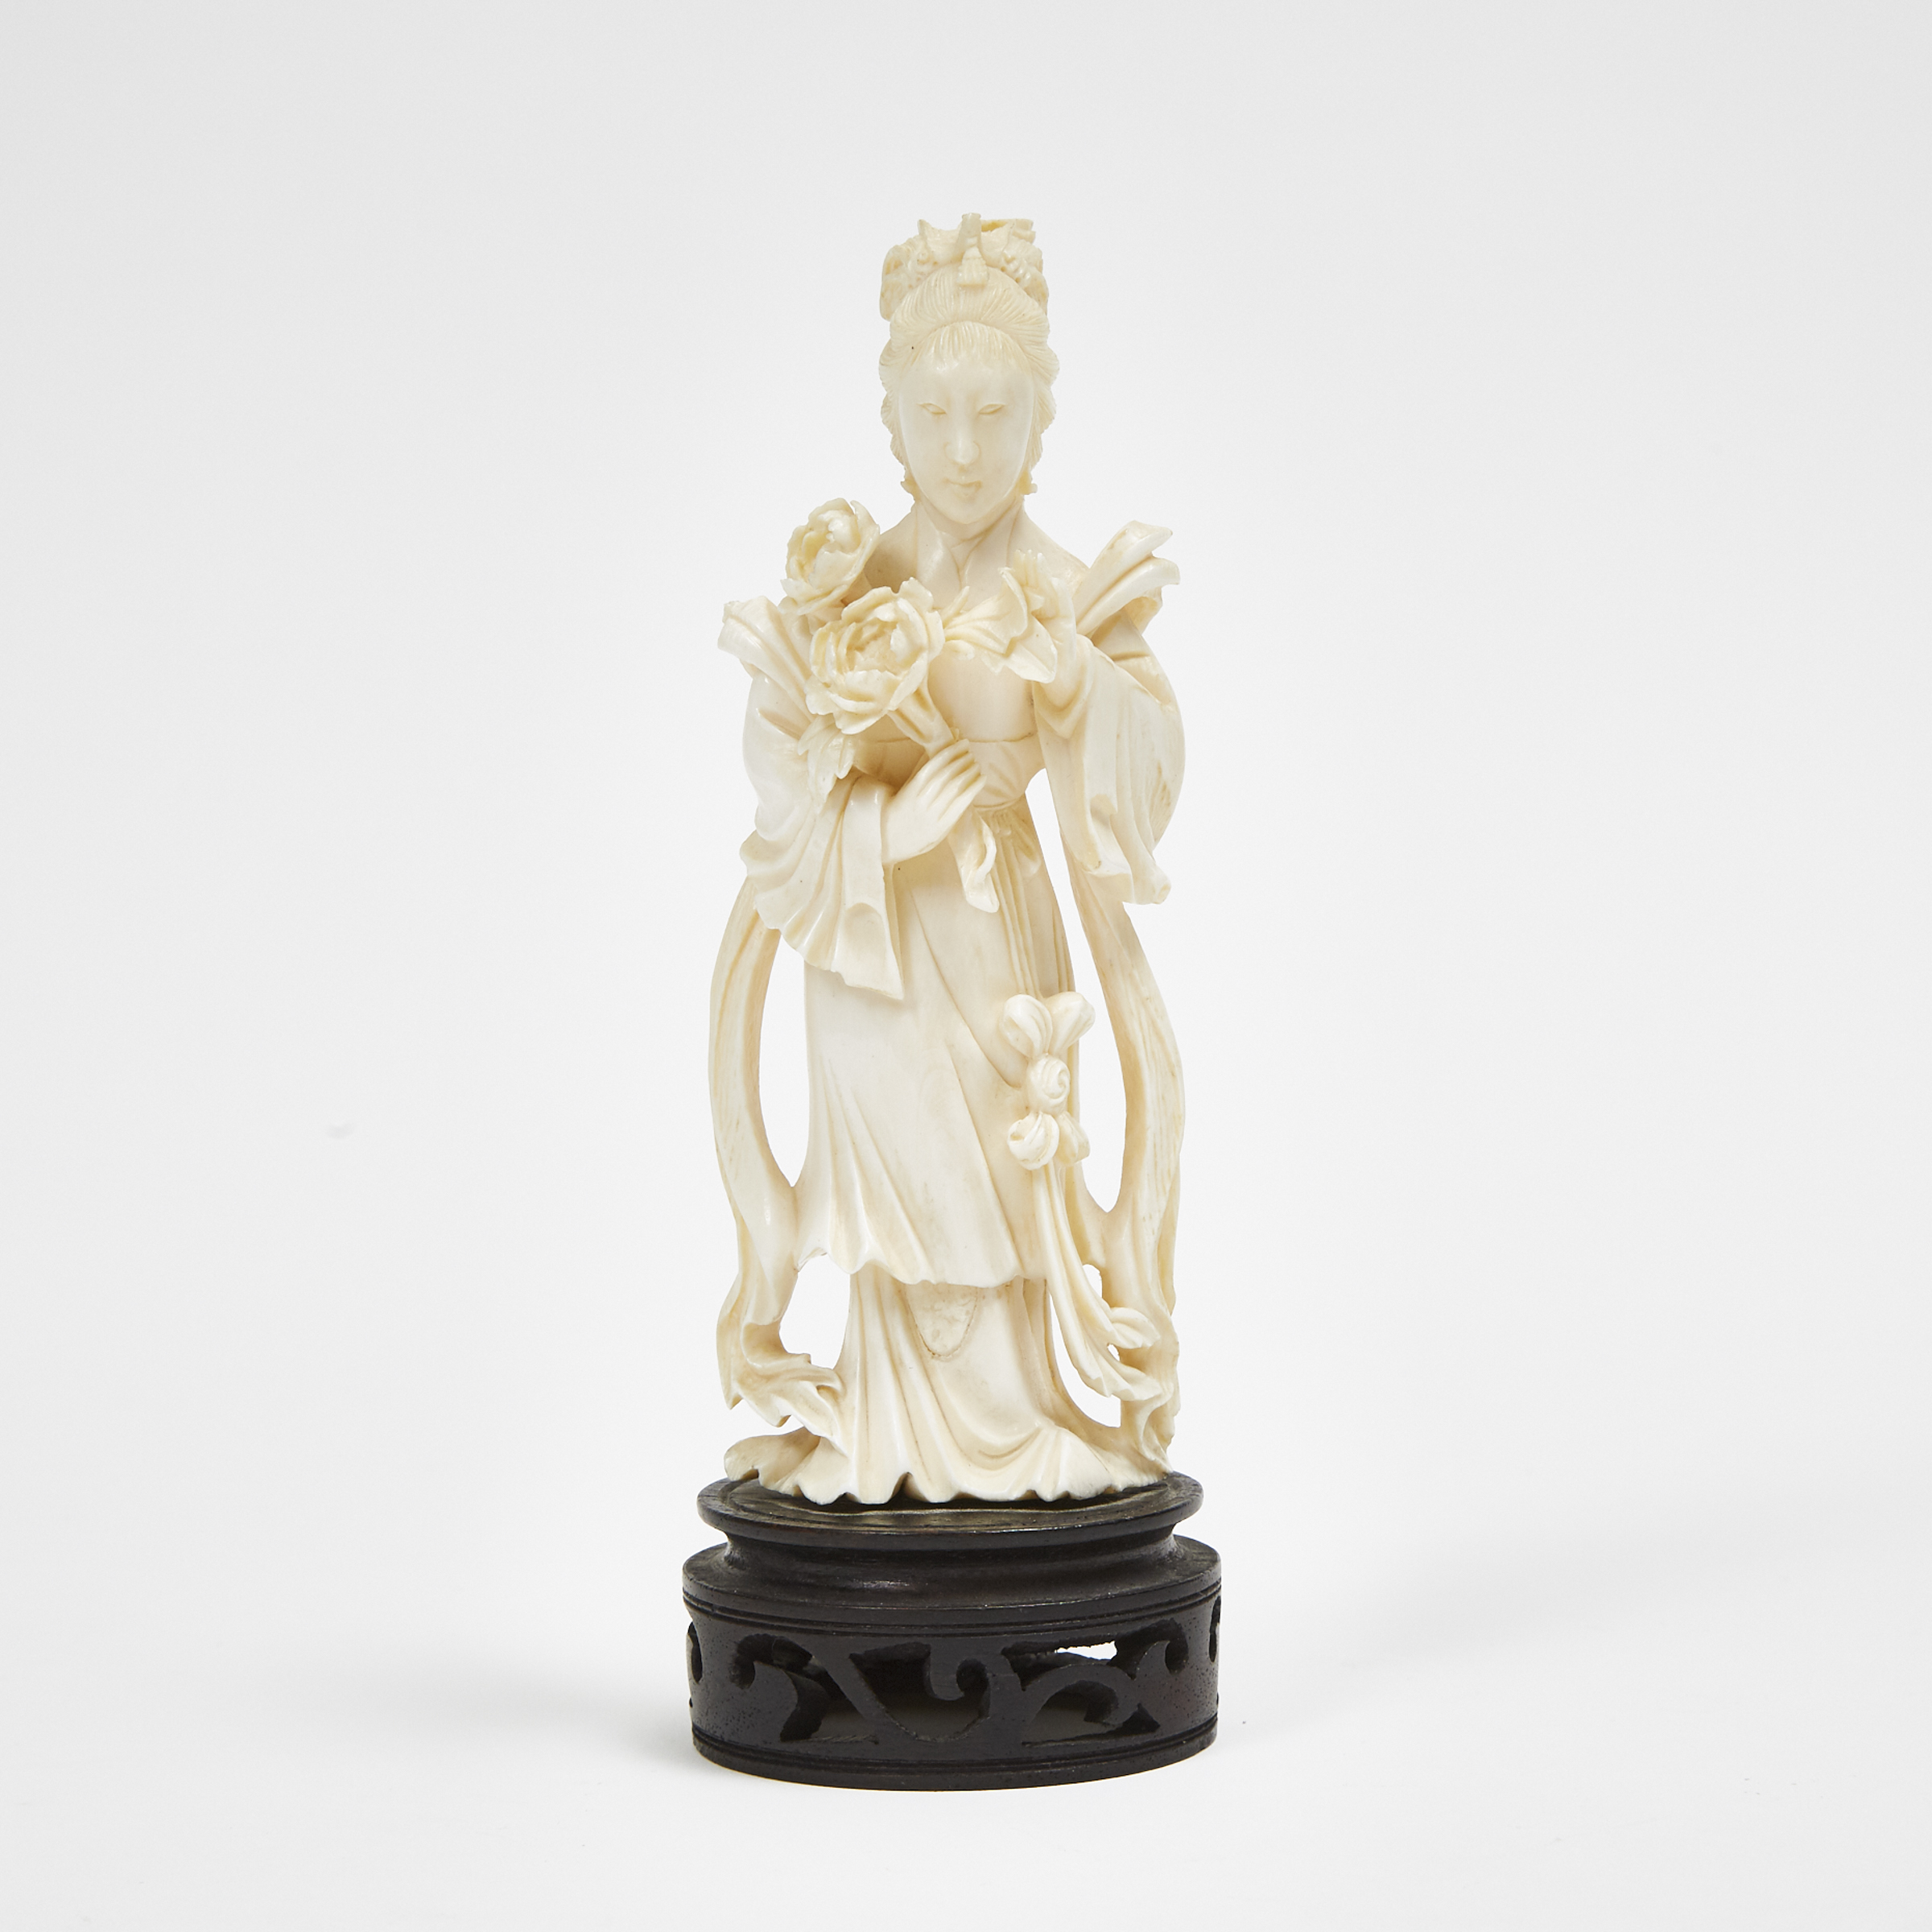 An Ivory or Composite Carved Lady with Flowers